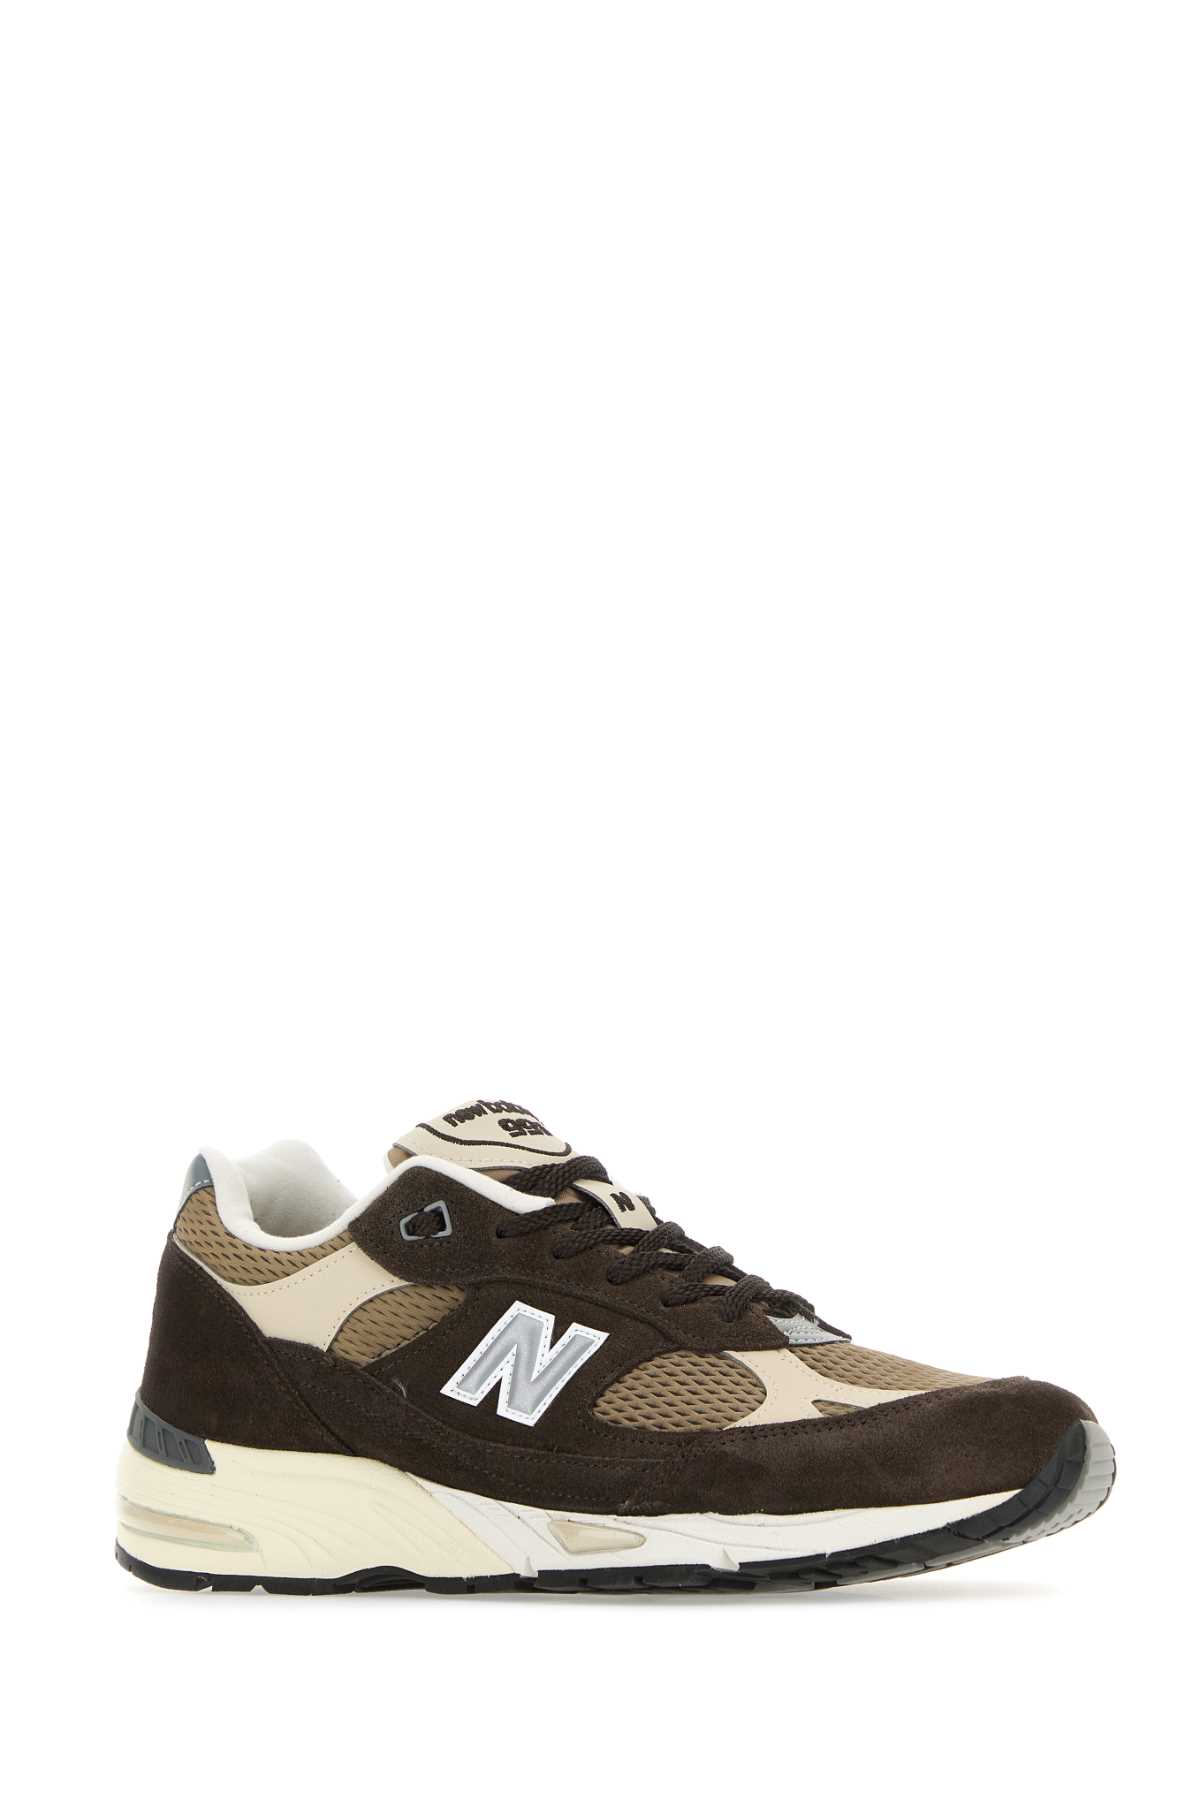 Shop New Balance Brown Suede And Mesh 991v1 Sneakers